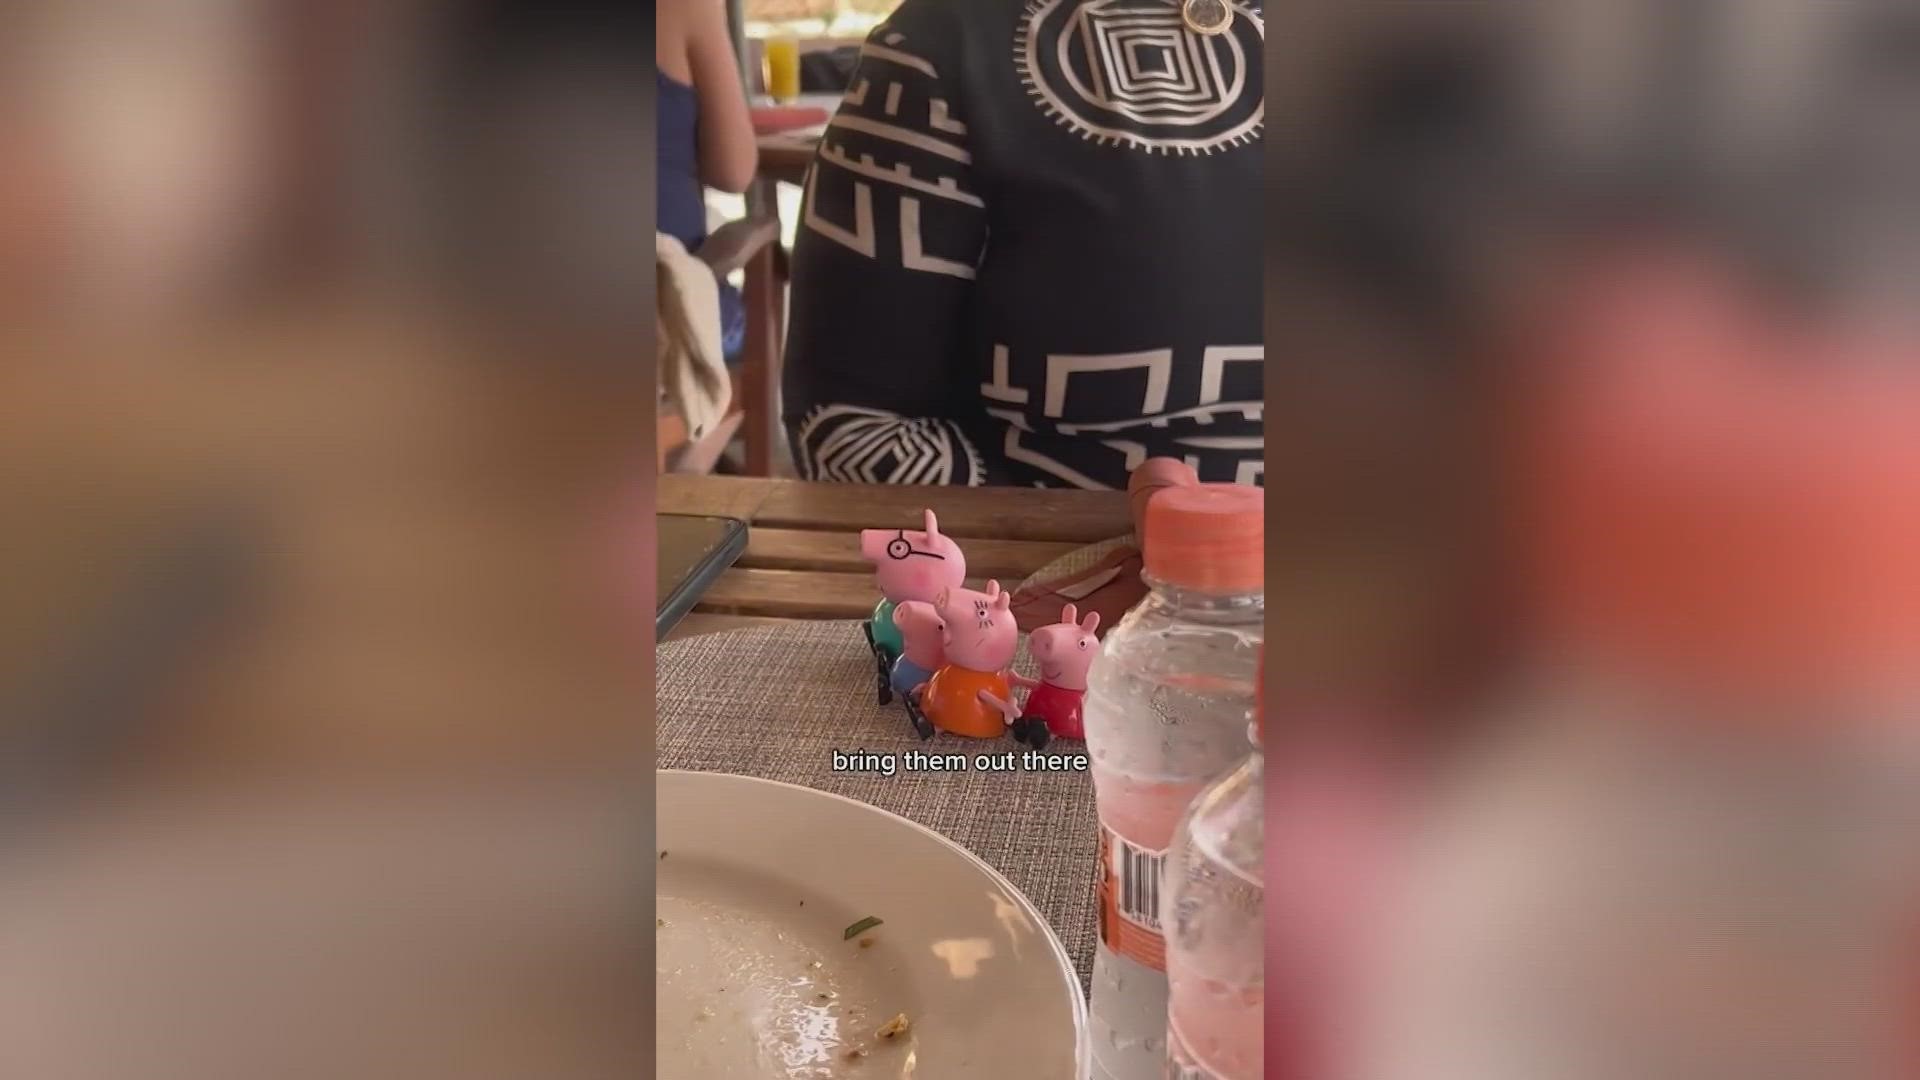 The TikTok user that uploaded the video said her niece had slipped her toys into her granddad's bag, so he decided to make the most with them.